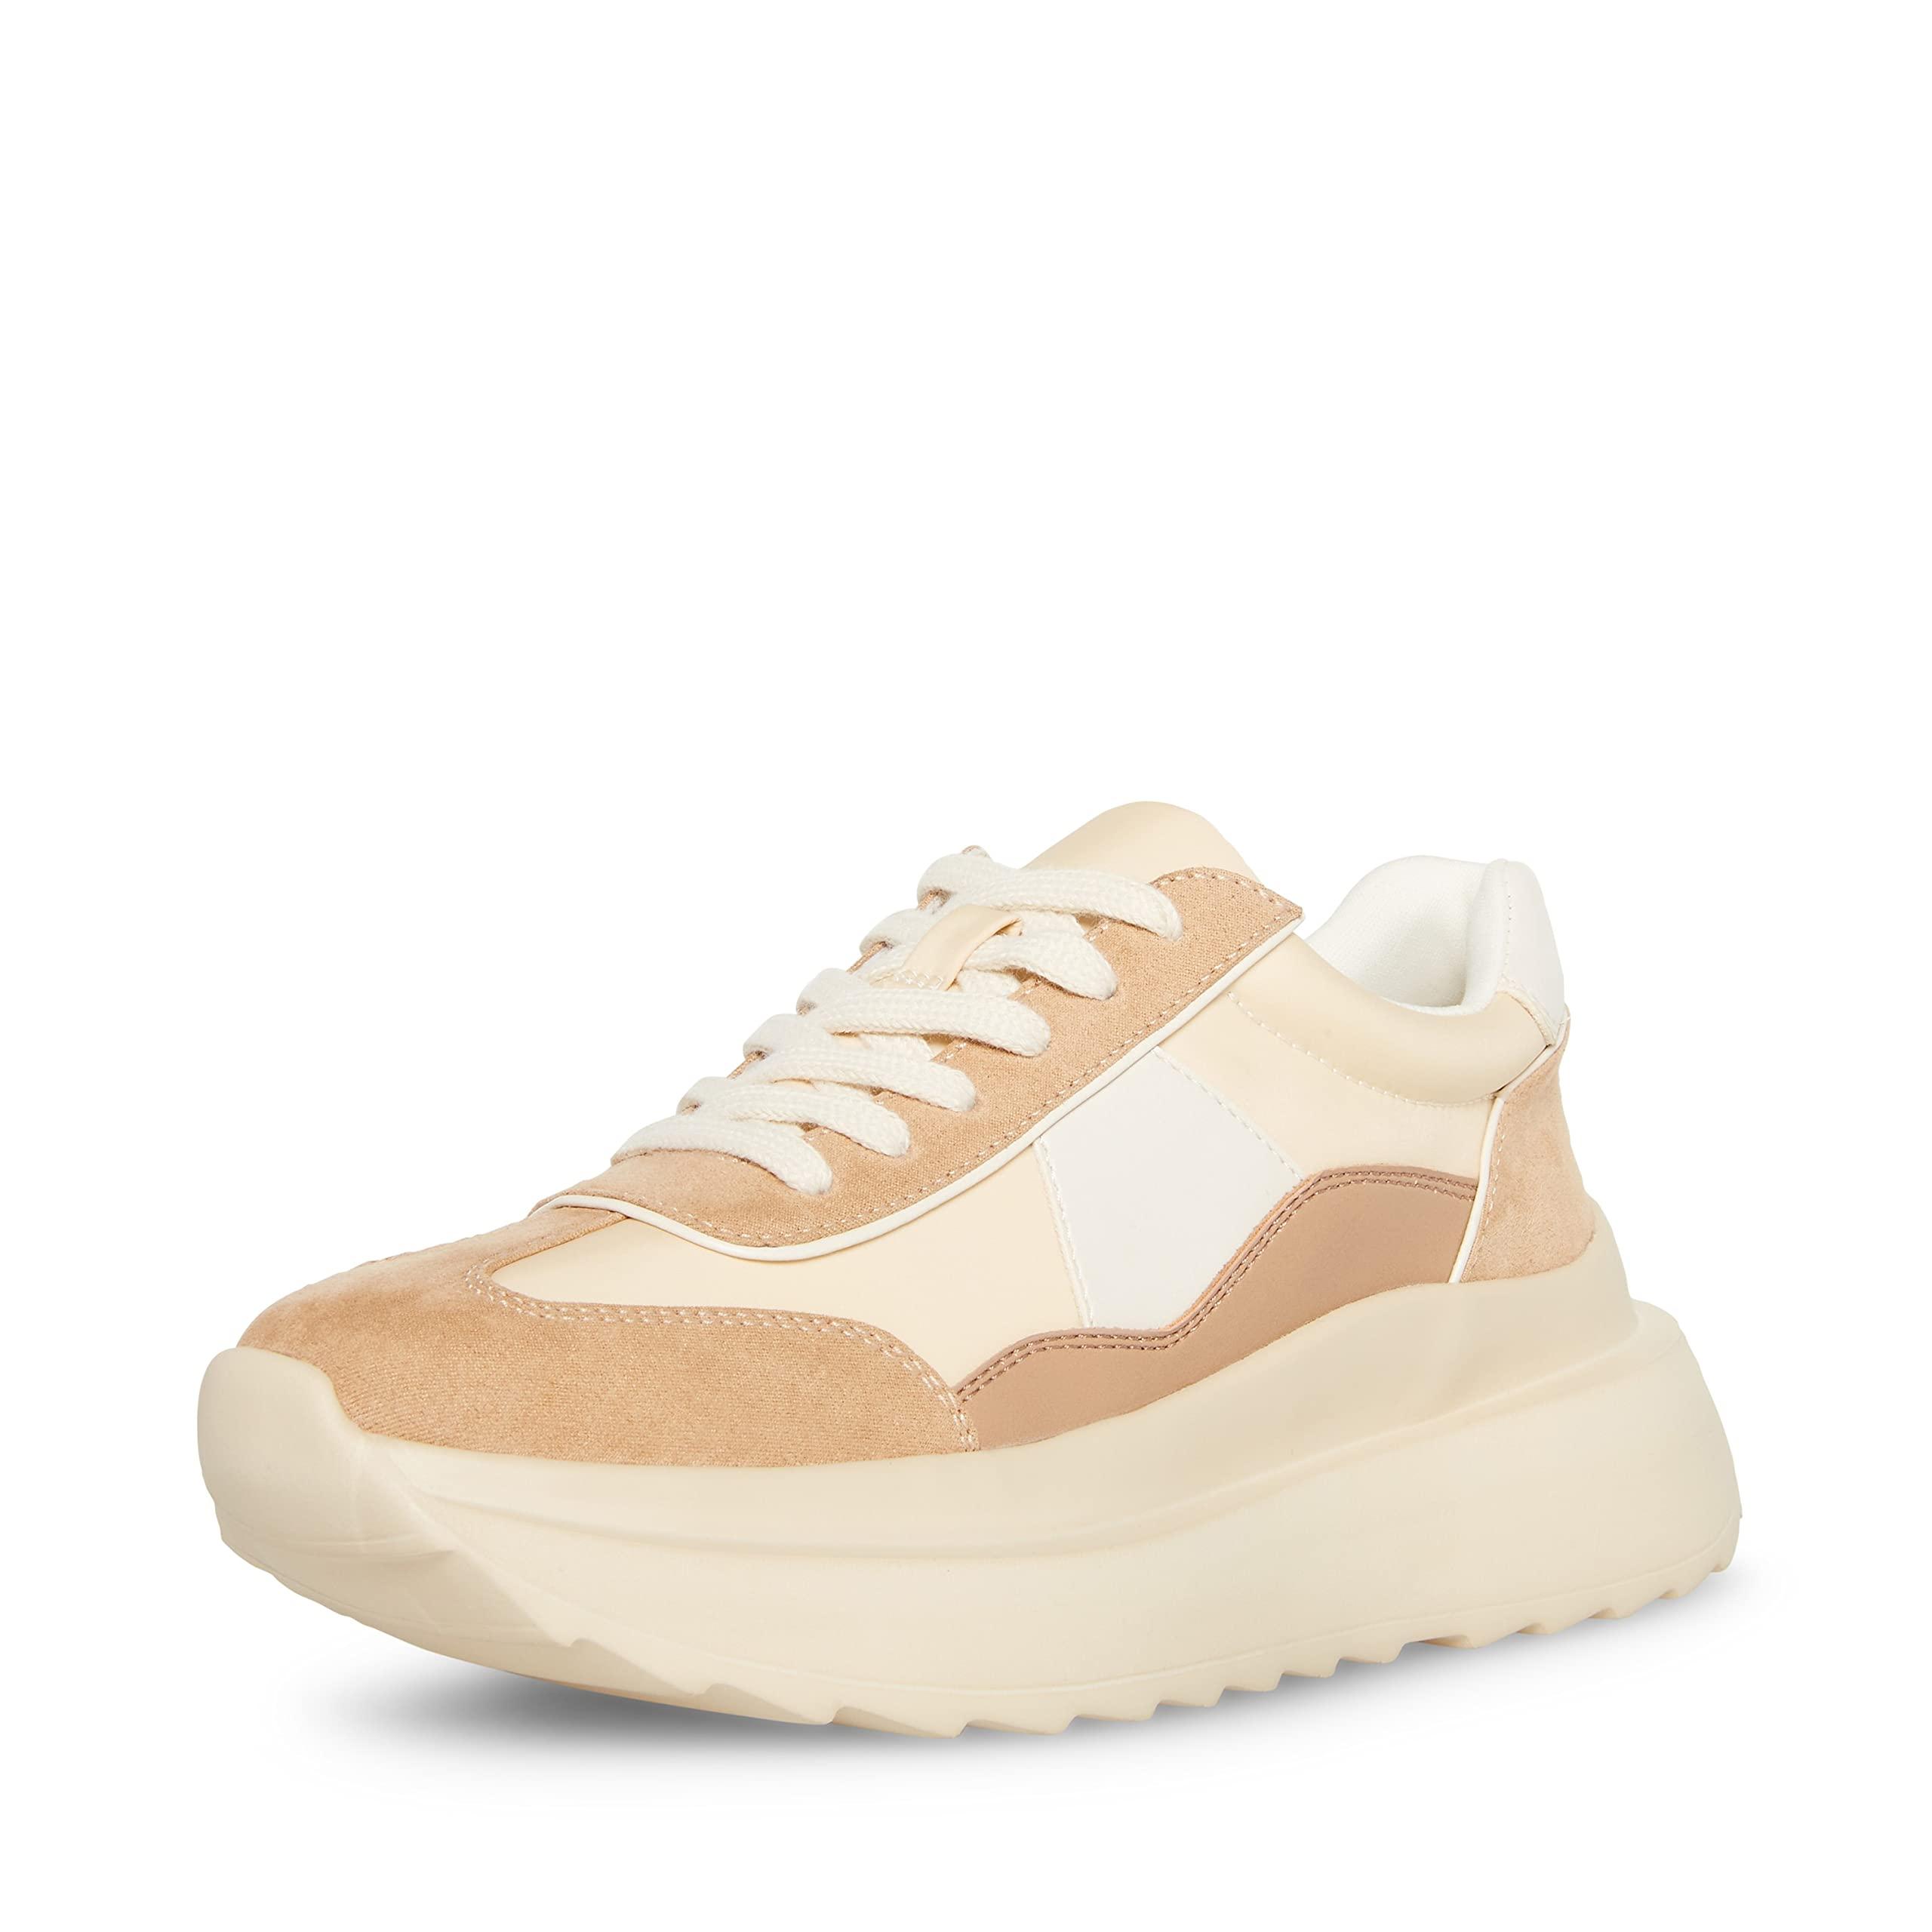 Madden Girl Amica Sneaker in Natural | Lyst